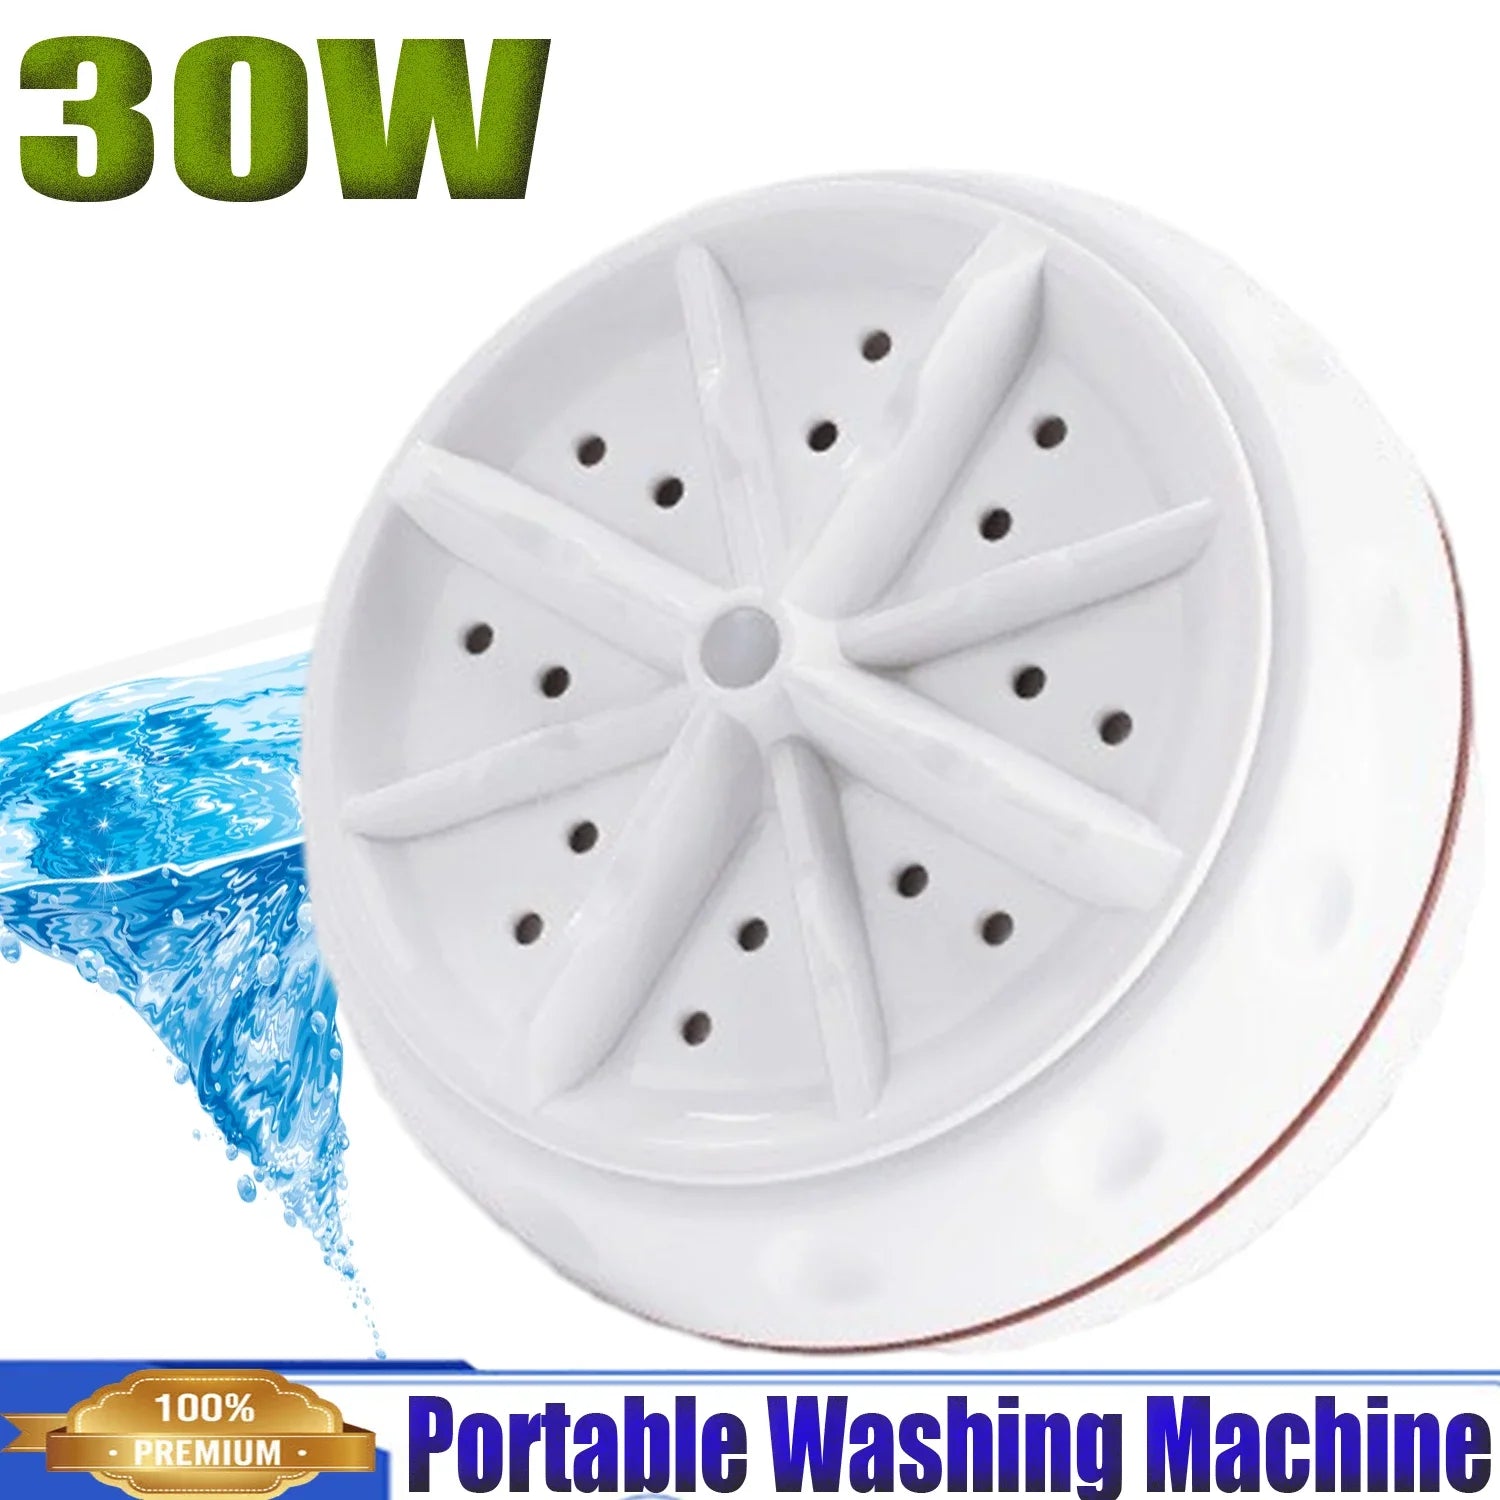 Portable Washing Machine,30W Strong Torque Forward Reverse Rotate Washing for Sock Underwear Kid's Clothes Bowl,for Home Travel